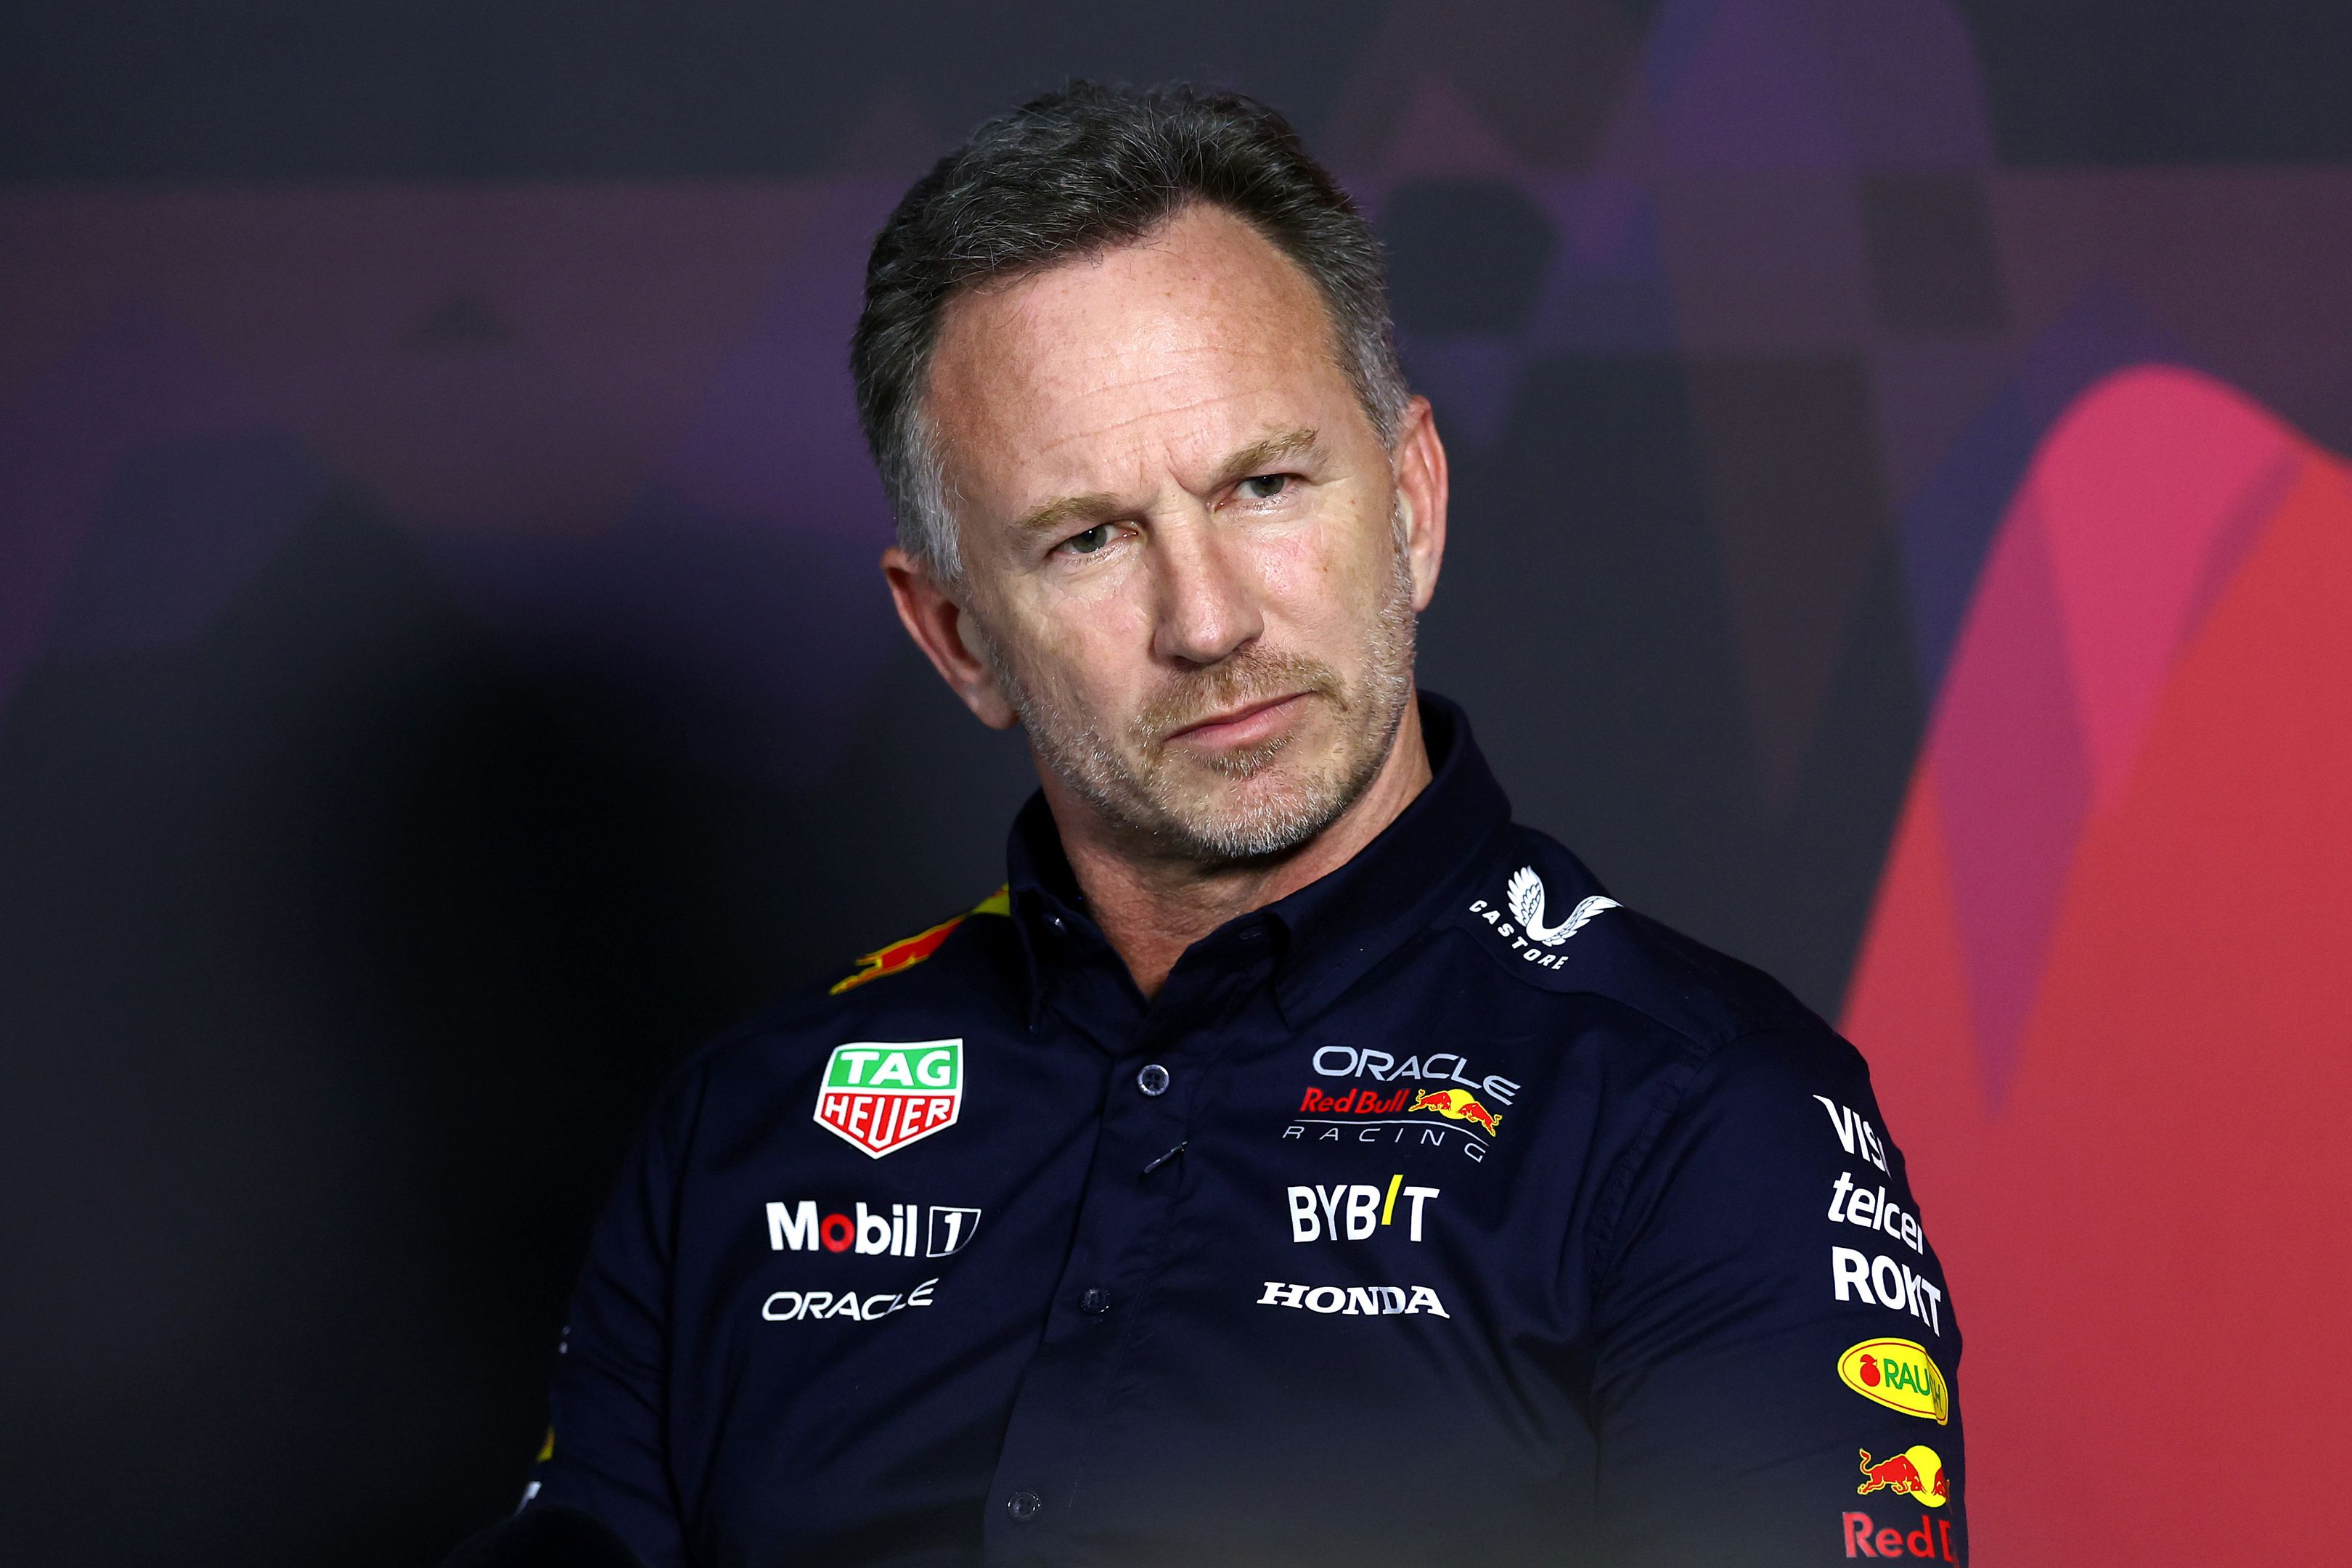 'They talk a lot': Christian Horner rips rival principals over 'movement between teams' comments